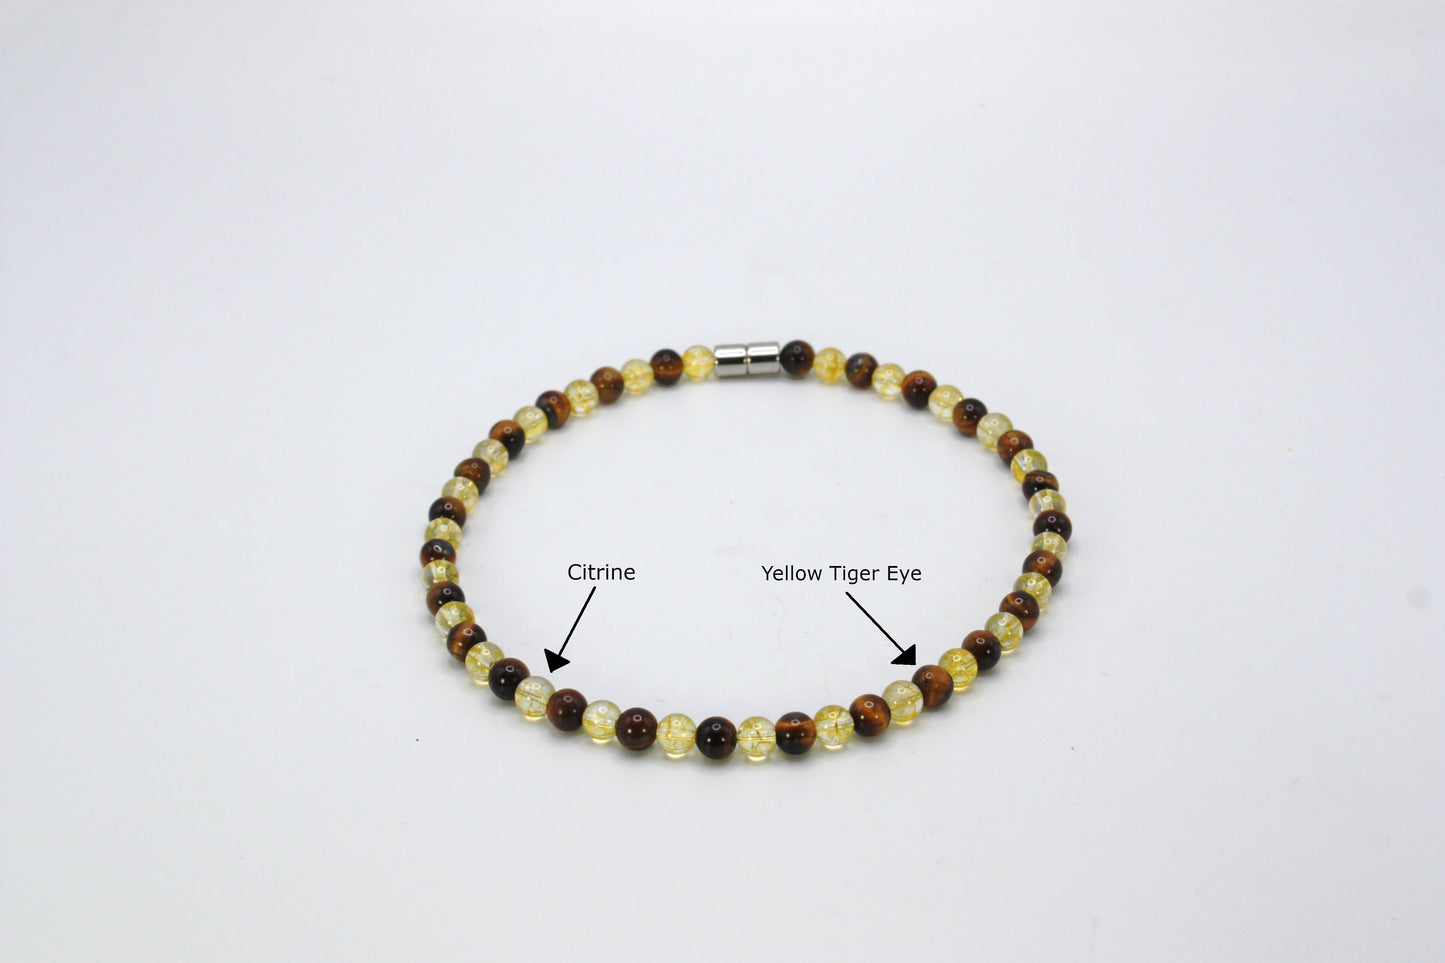 Genuine Yellow Tiger Eye and Citrine Necklace - Gifts for Man/Woman - 6mm Bead Diameter Necklace